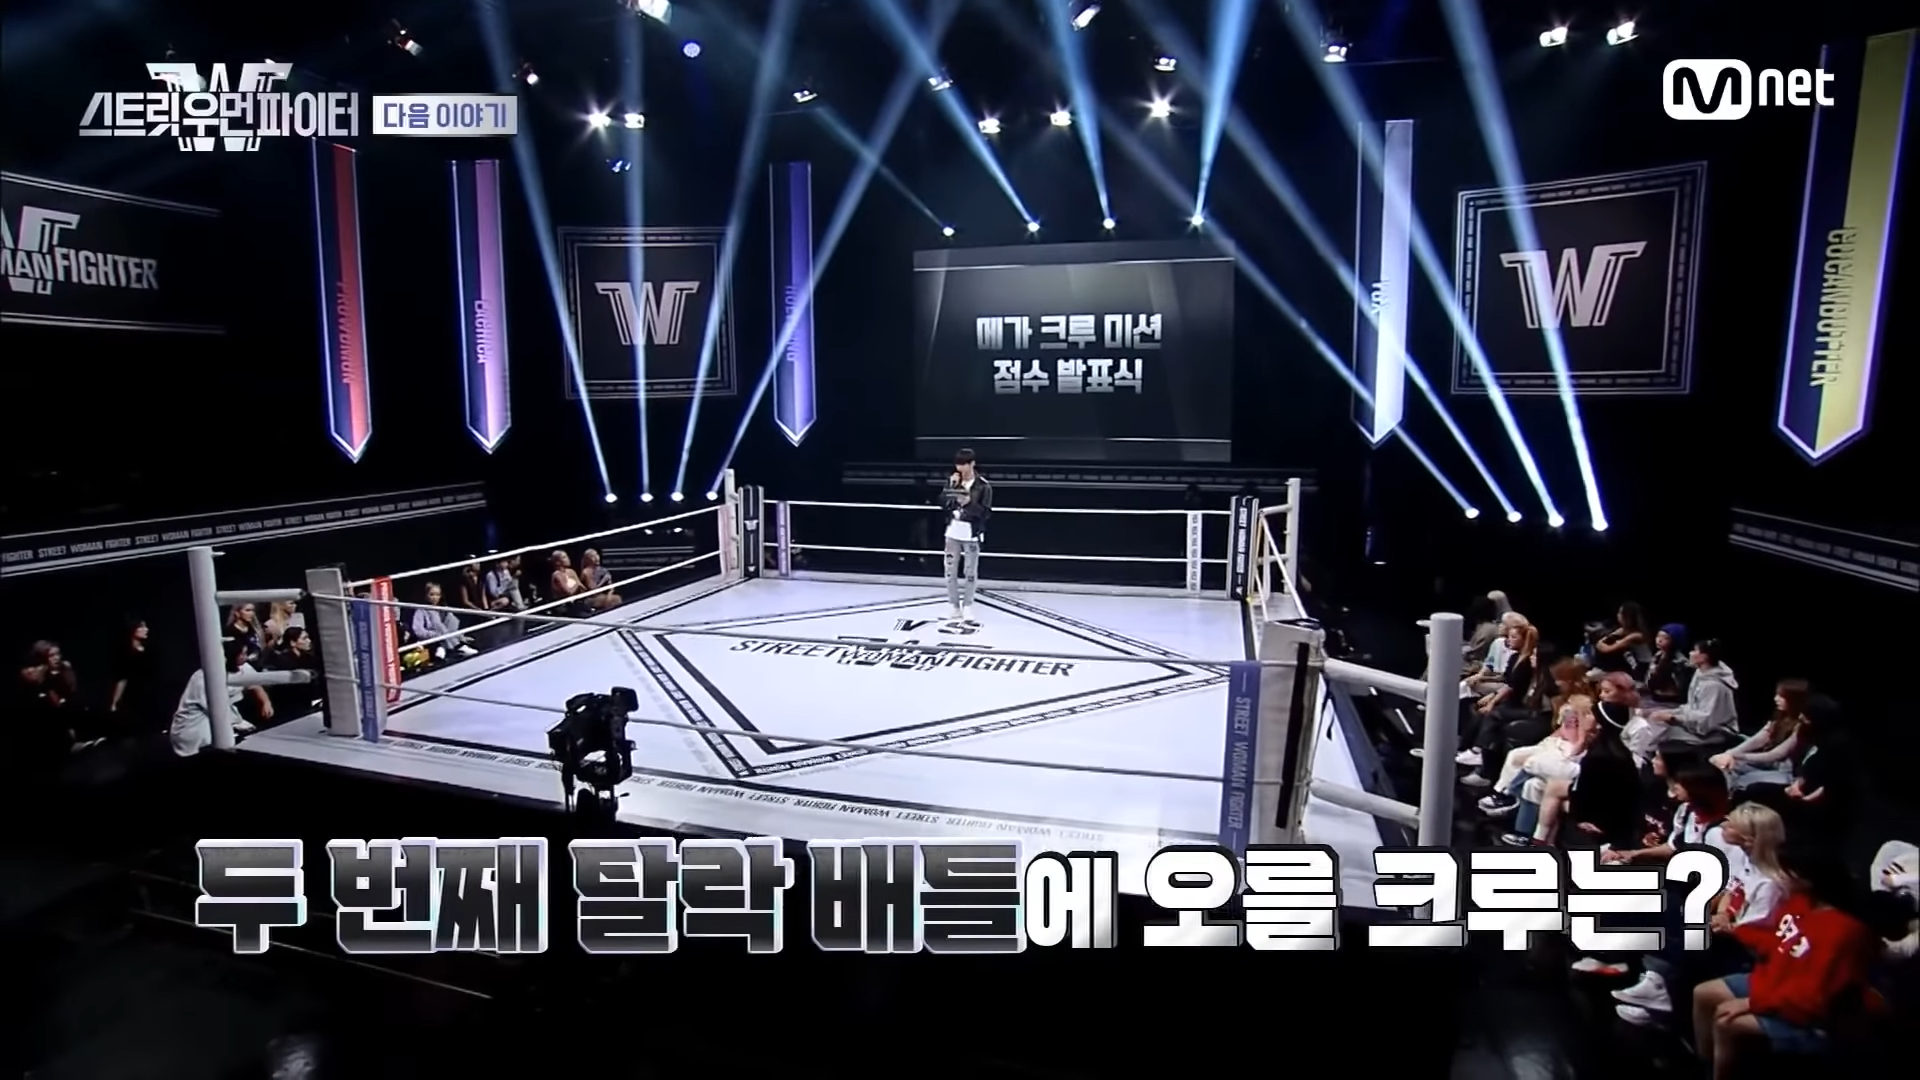 Street woman fighter mnet ep 1 eng sub